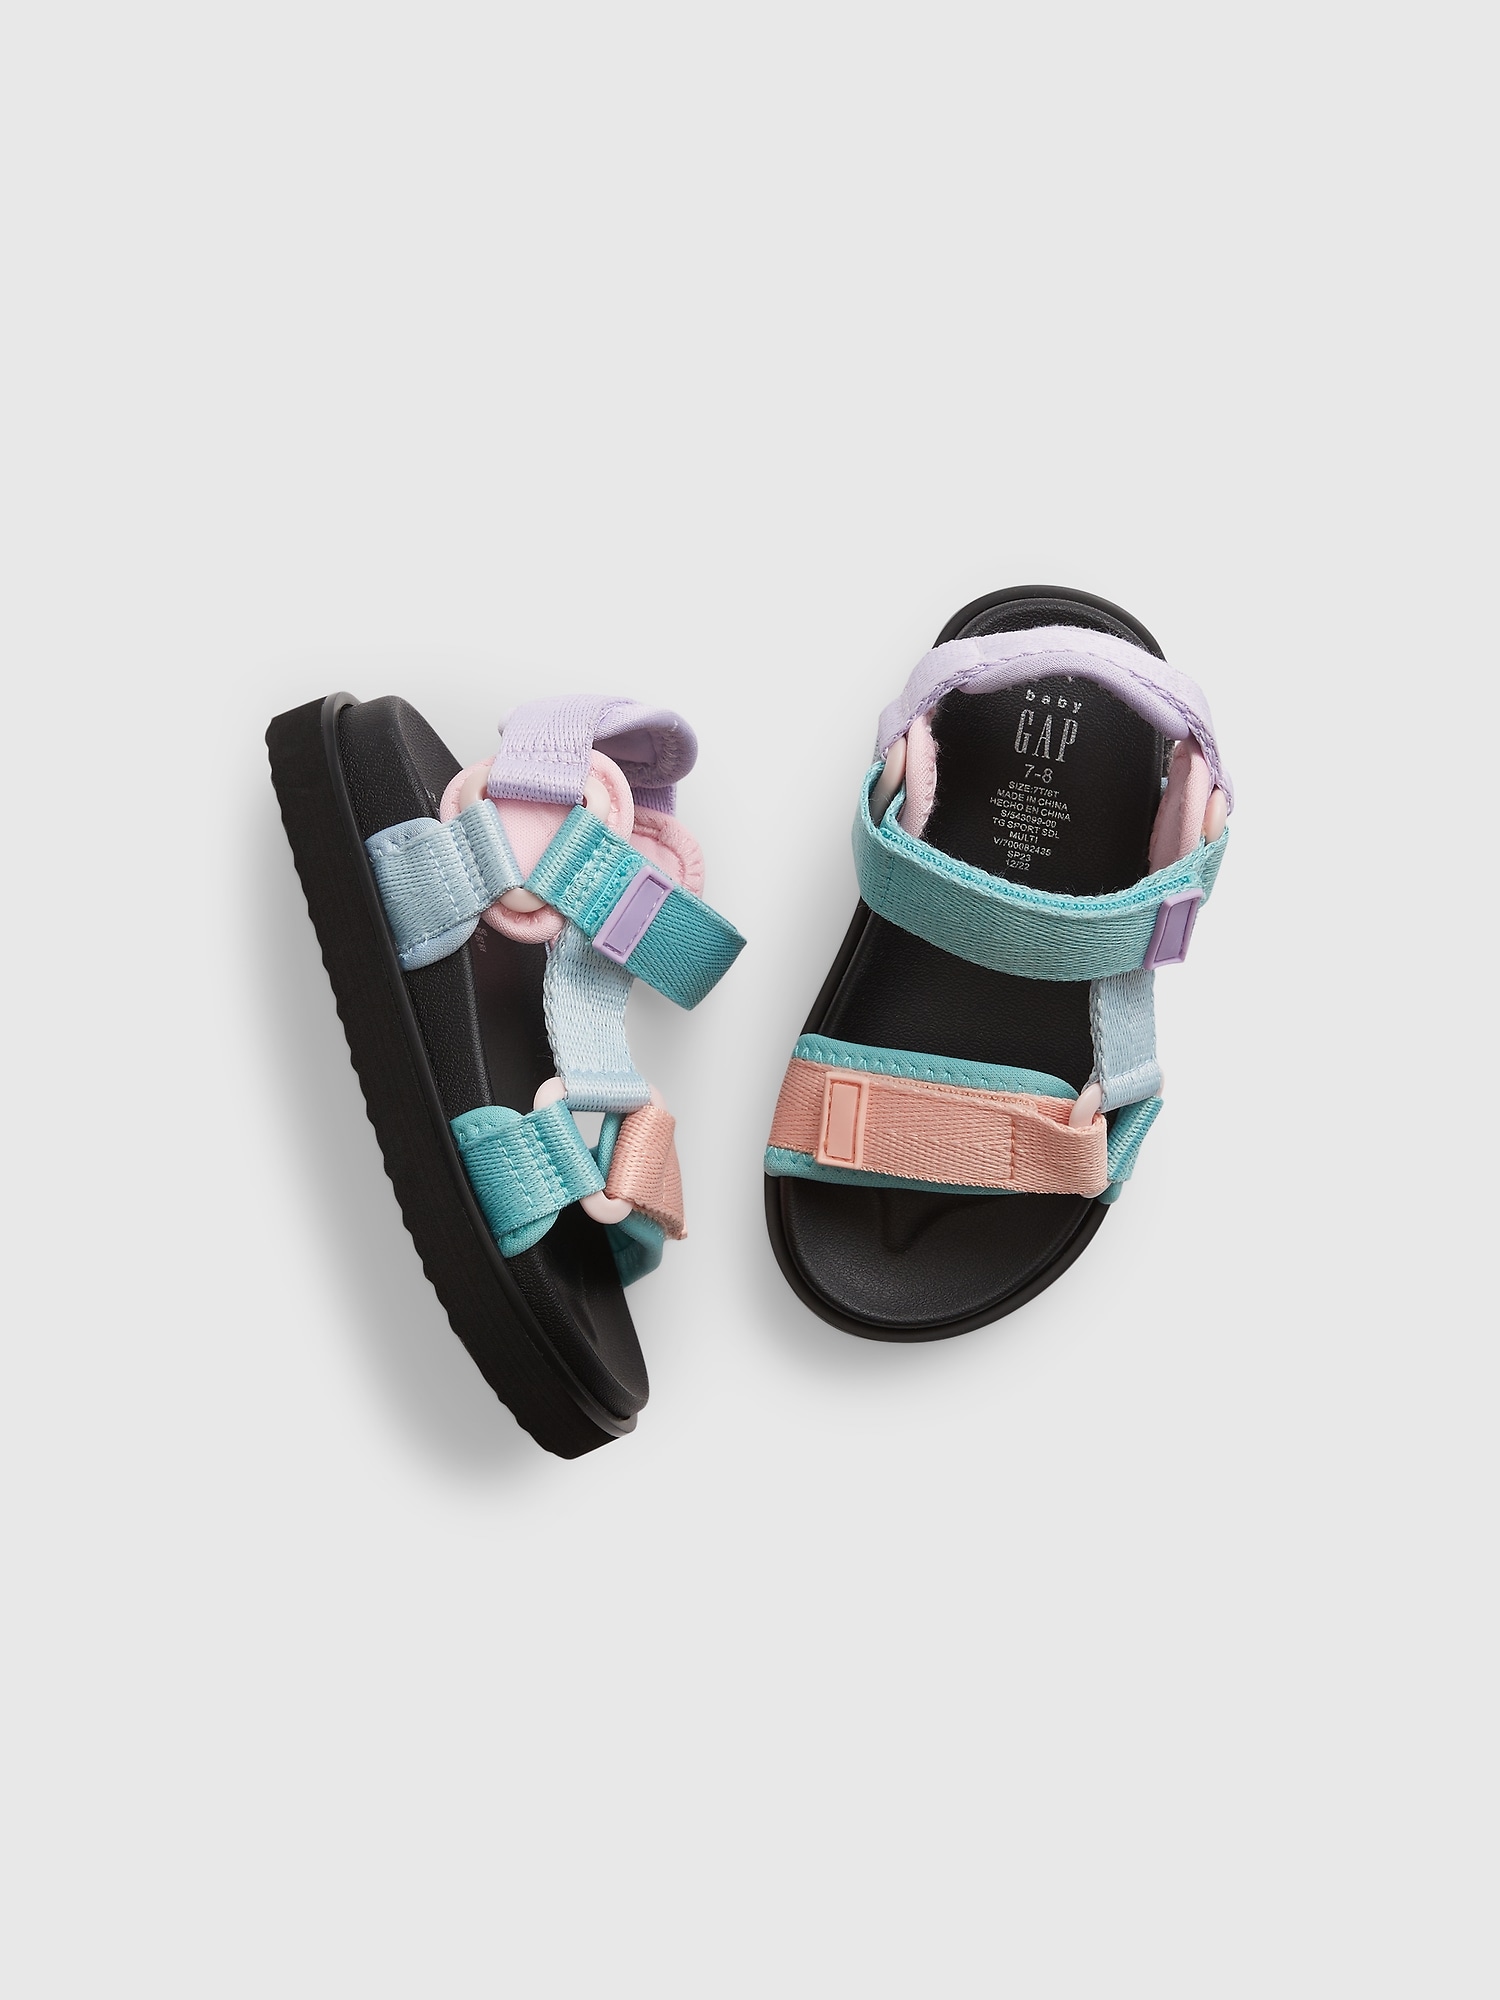 Gap Babies' Toddler Sporty Sandals In Multi